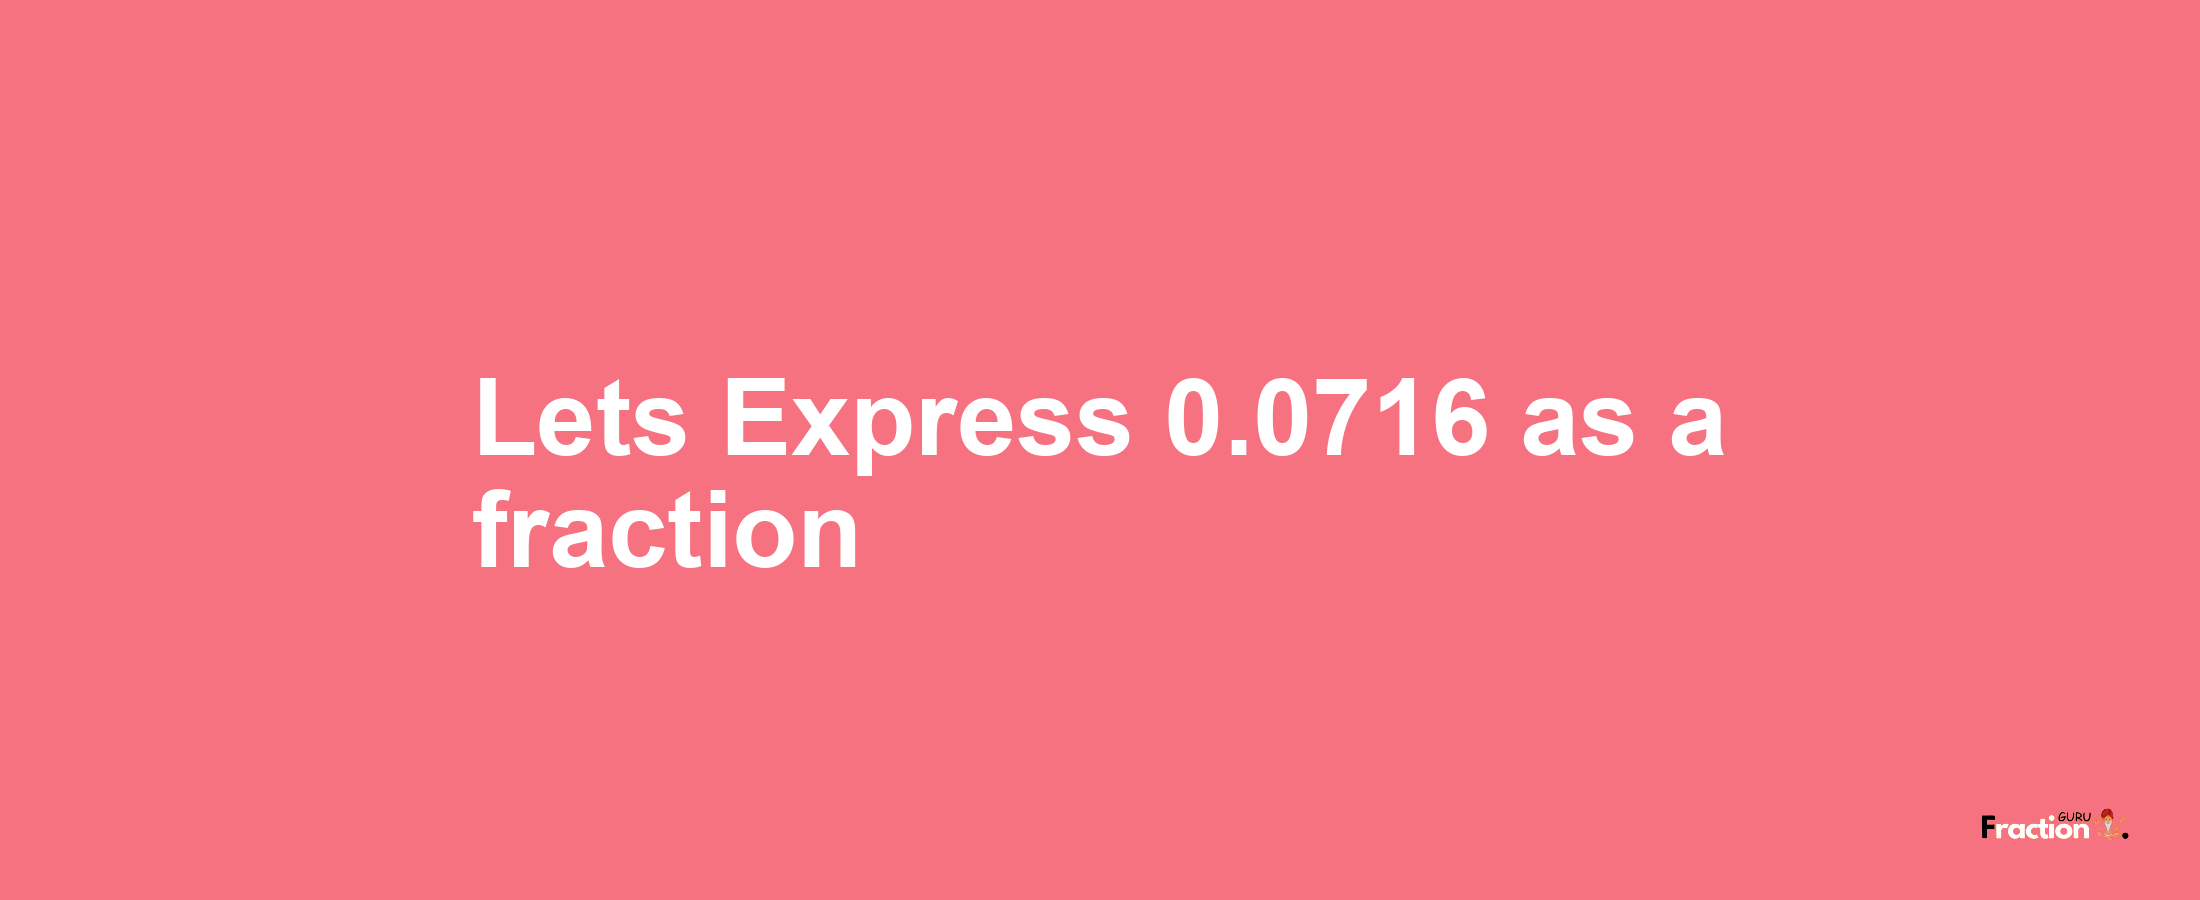 Lets Express 0.0716 as afraction